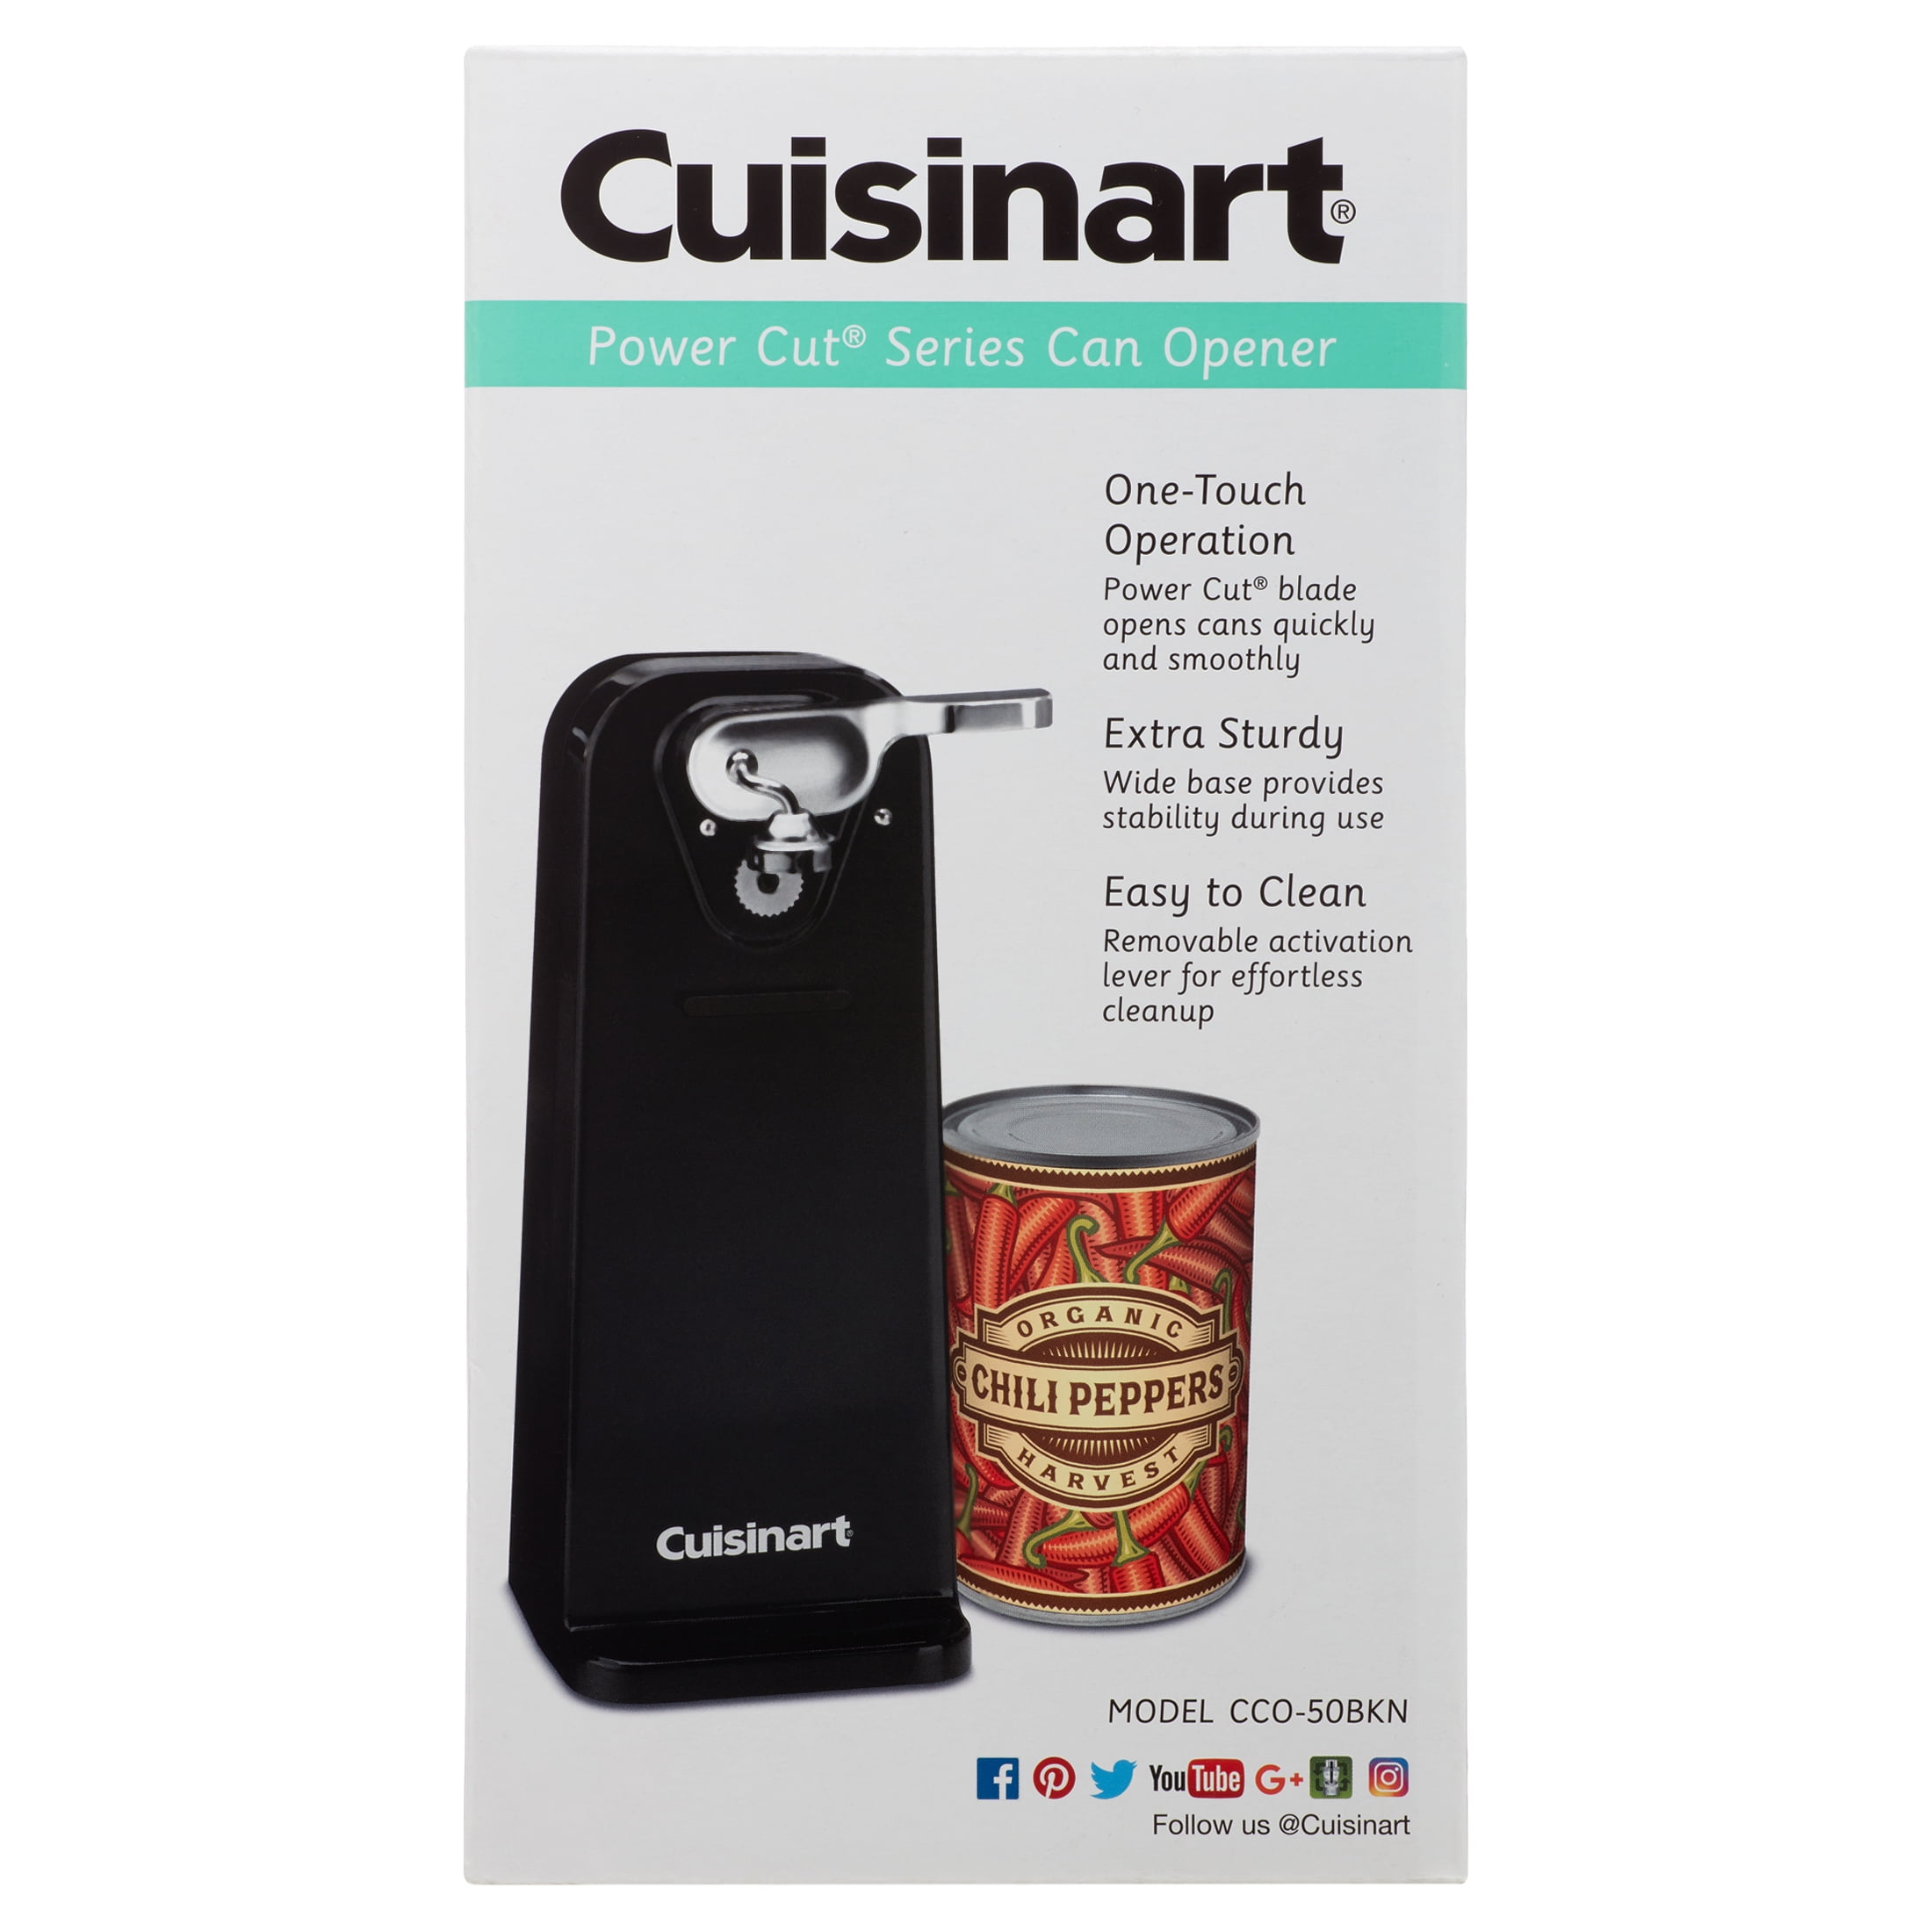 Cuisinart ® Electric Can Opener